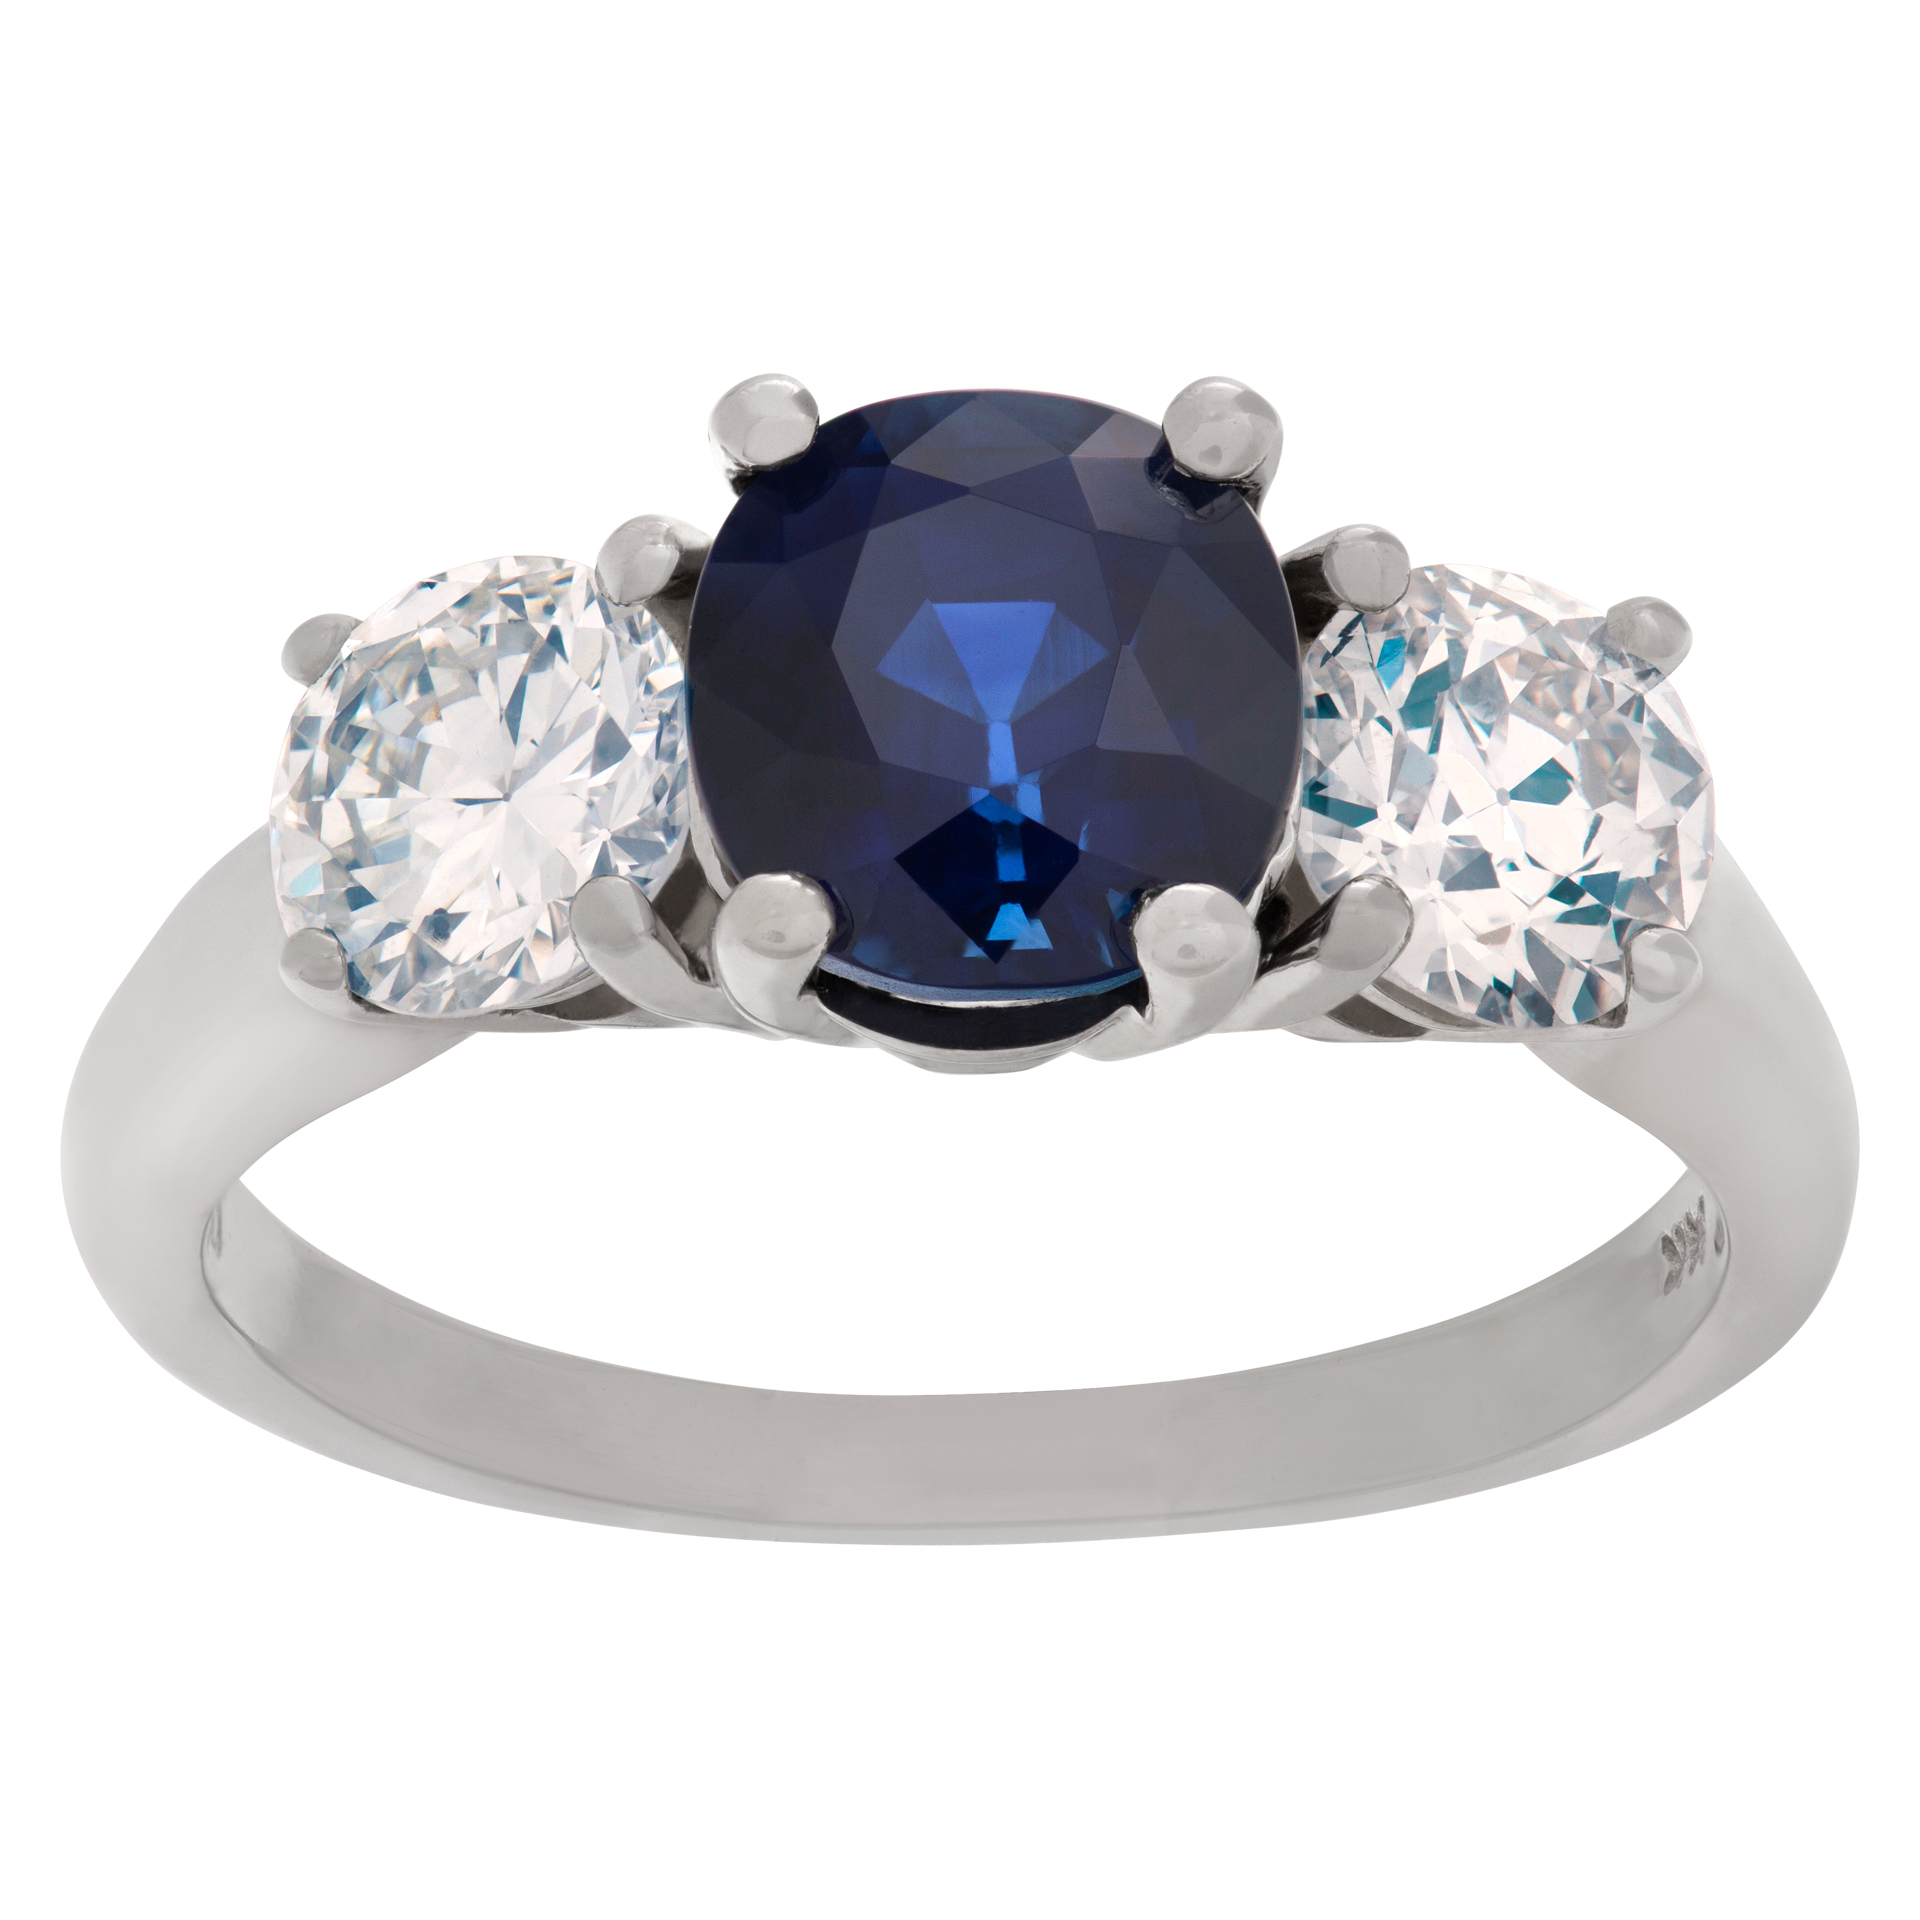 Sapphire & diamond ring in 14k white gold. 1.92 ct AGL certified unheated sapphire. image 1